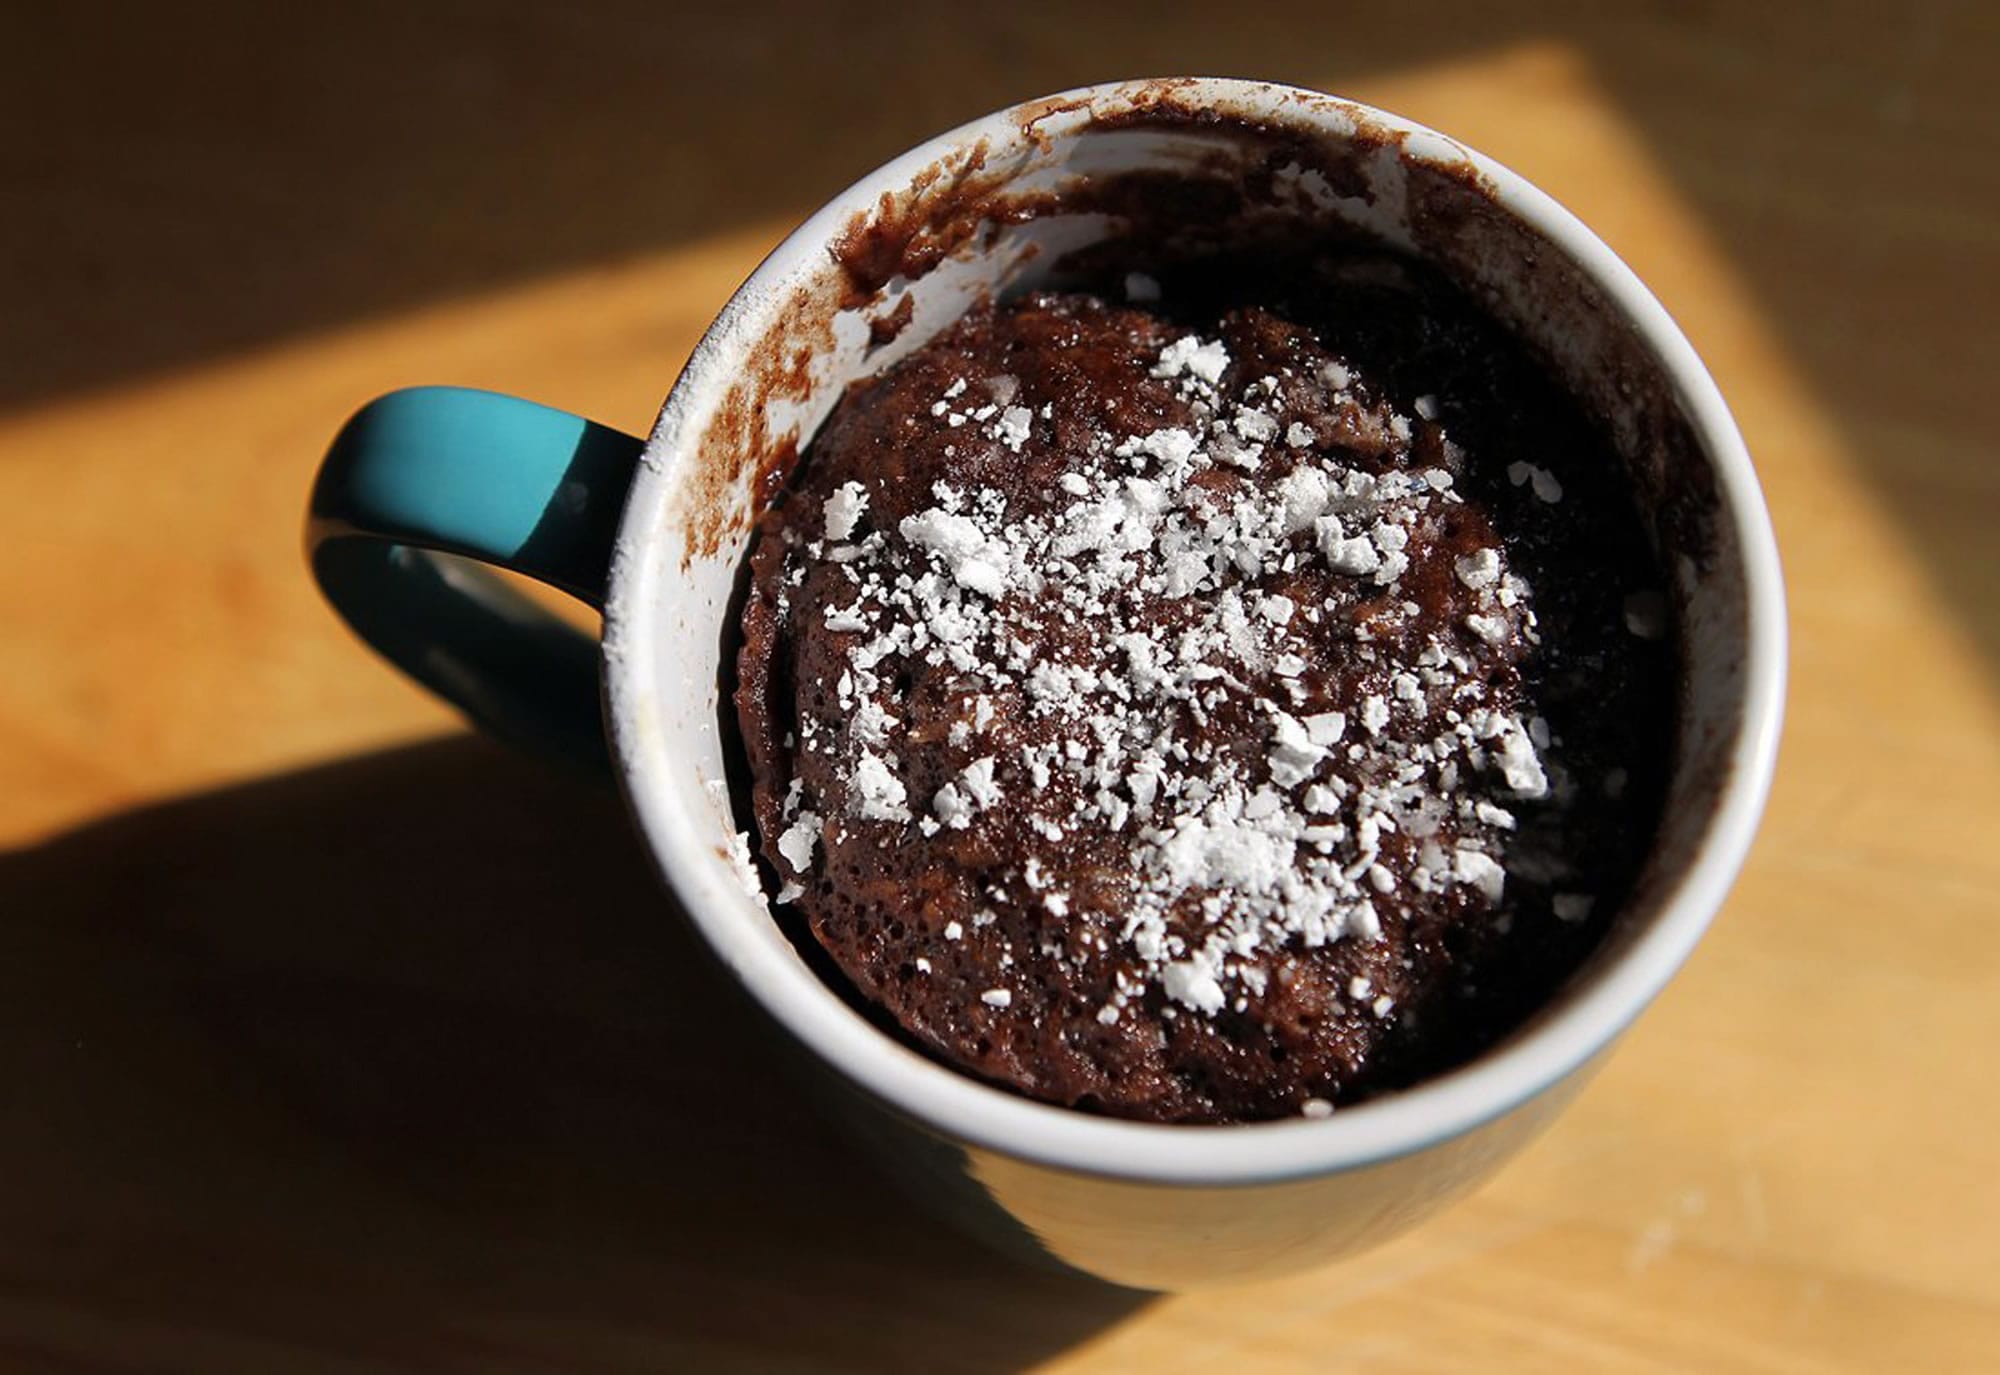 A dessert is a quick and easy thing to serve with cakes made in a coffee cup in minutes in the microwave.